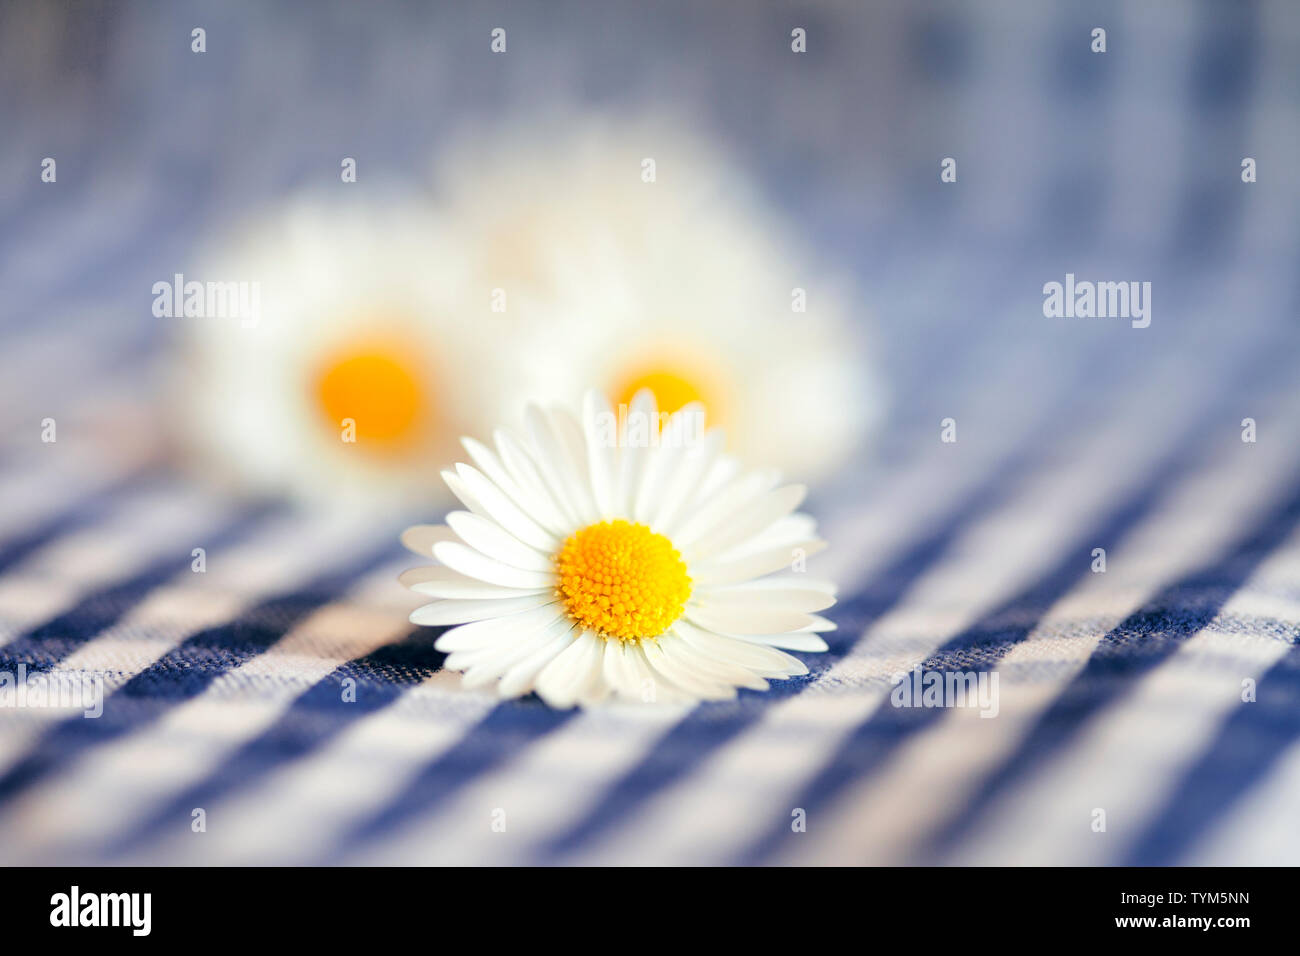 daisys on checked fabric Stock Photo